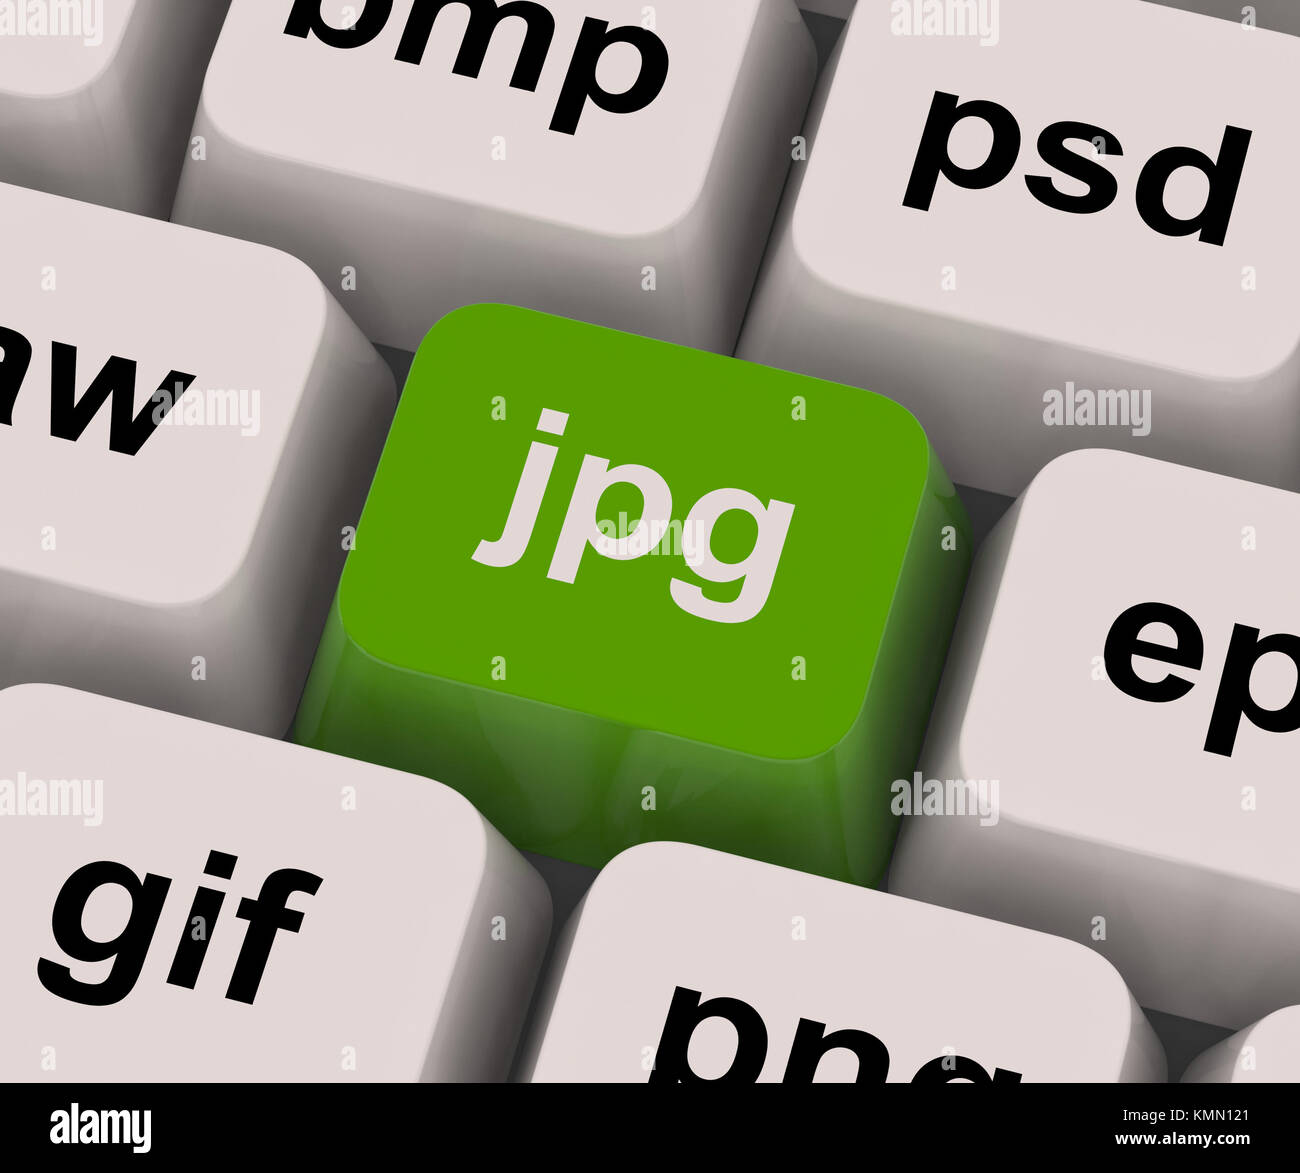 Jpg Key Showing Image Format For Internet Pictures Stock Photo